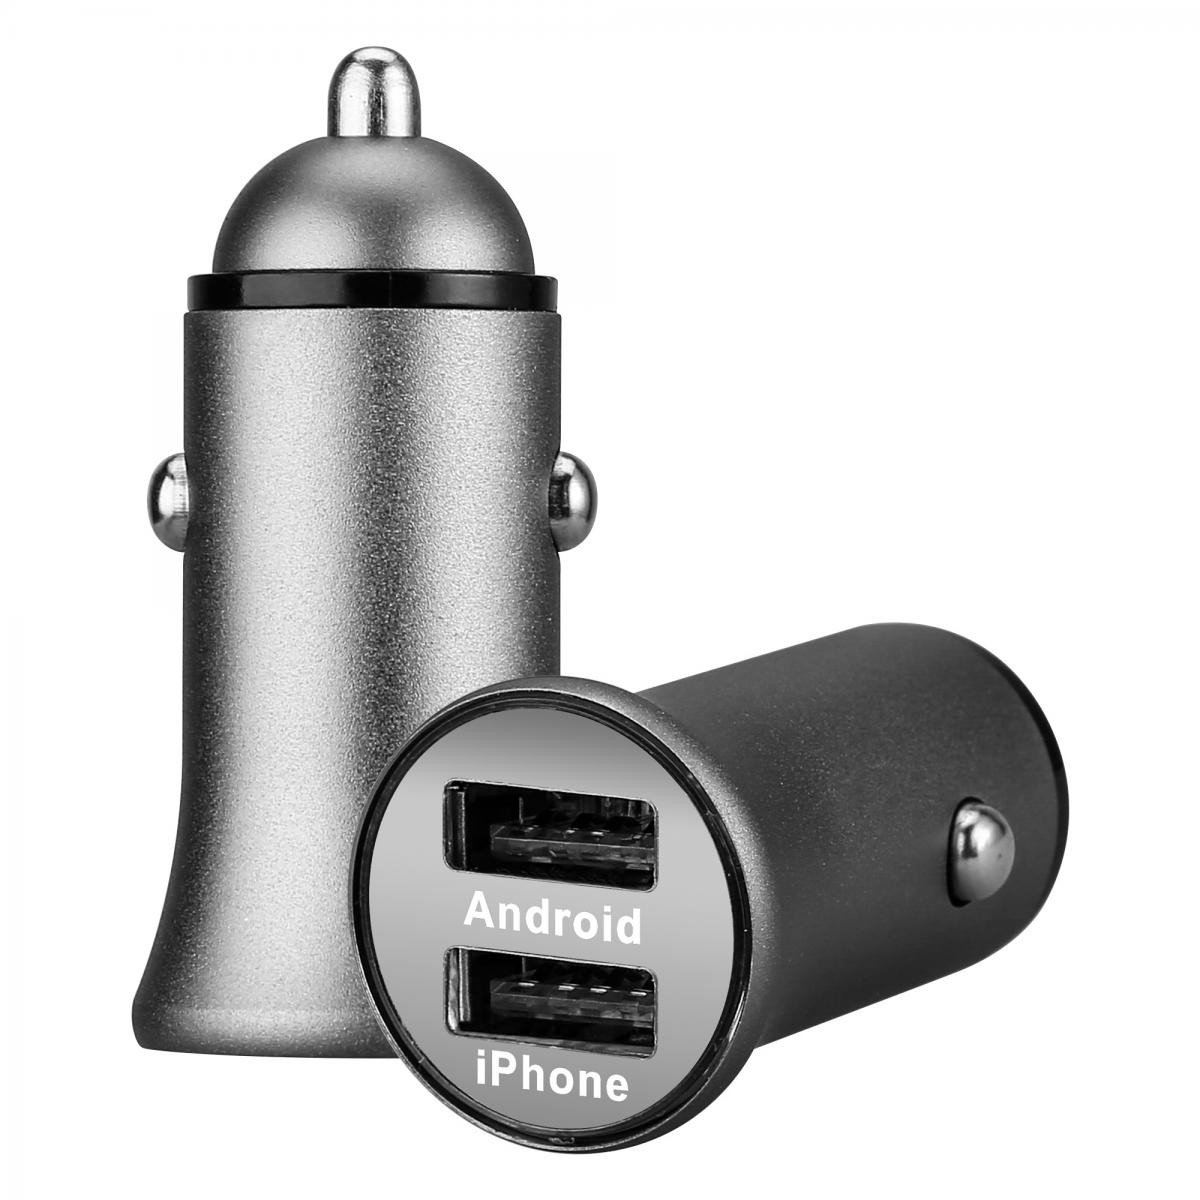 Shot - Double Adaptateur Metal Allume Cigare USB pour Smartphone WIKO View 4 Prise Double 2 Ports Voiture Chargeur - Chargeur Voiture 12V